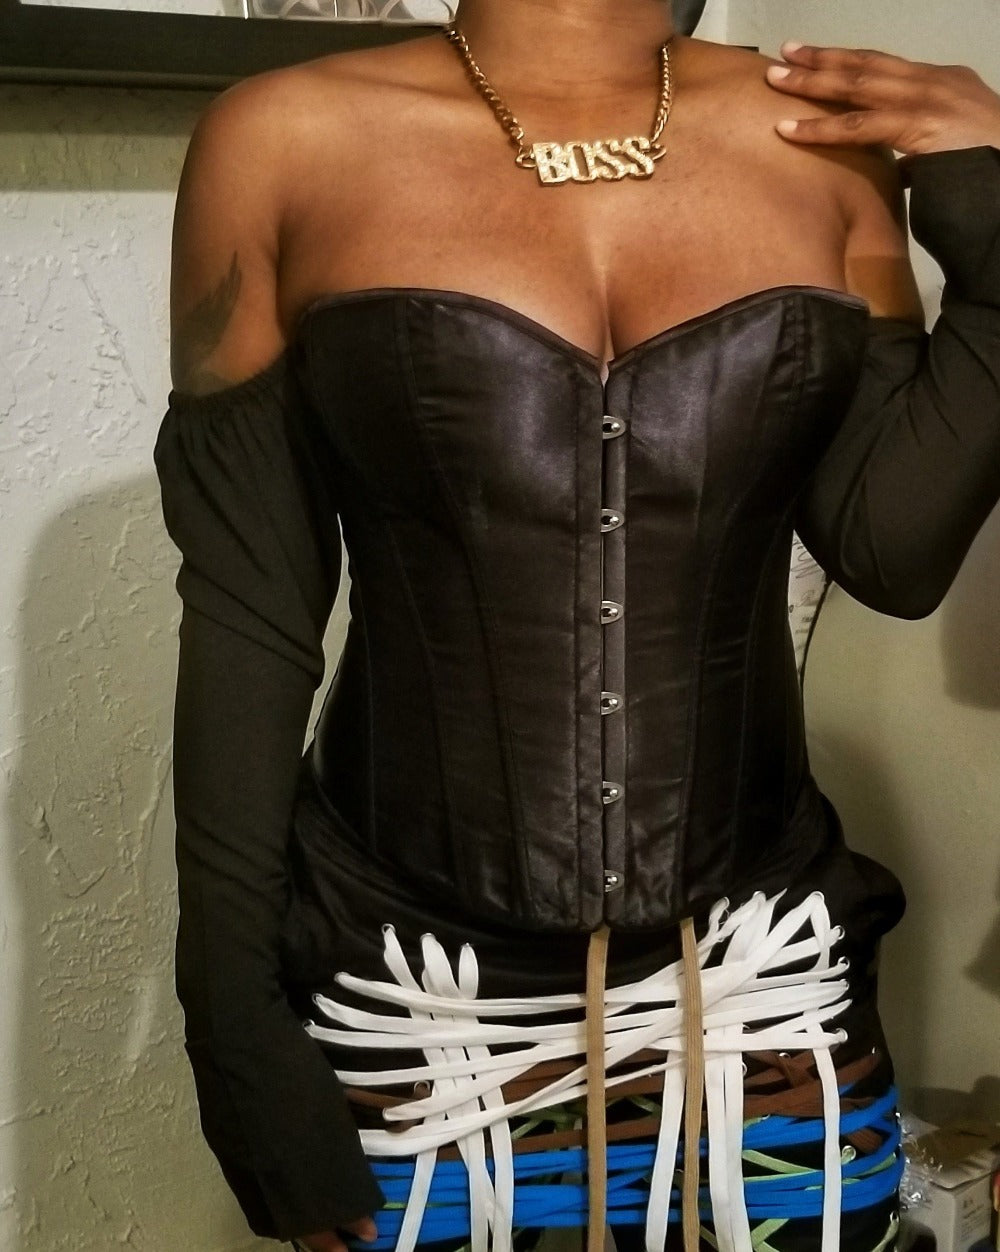 Pin on Corset outfit